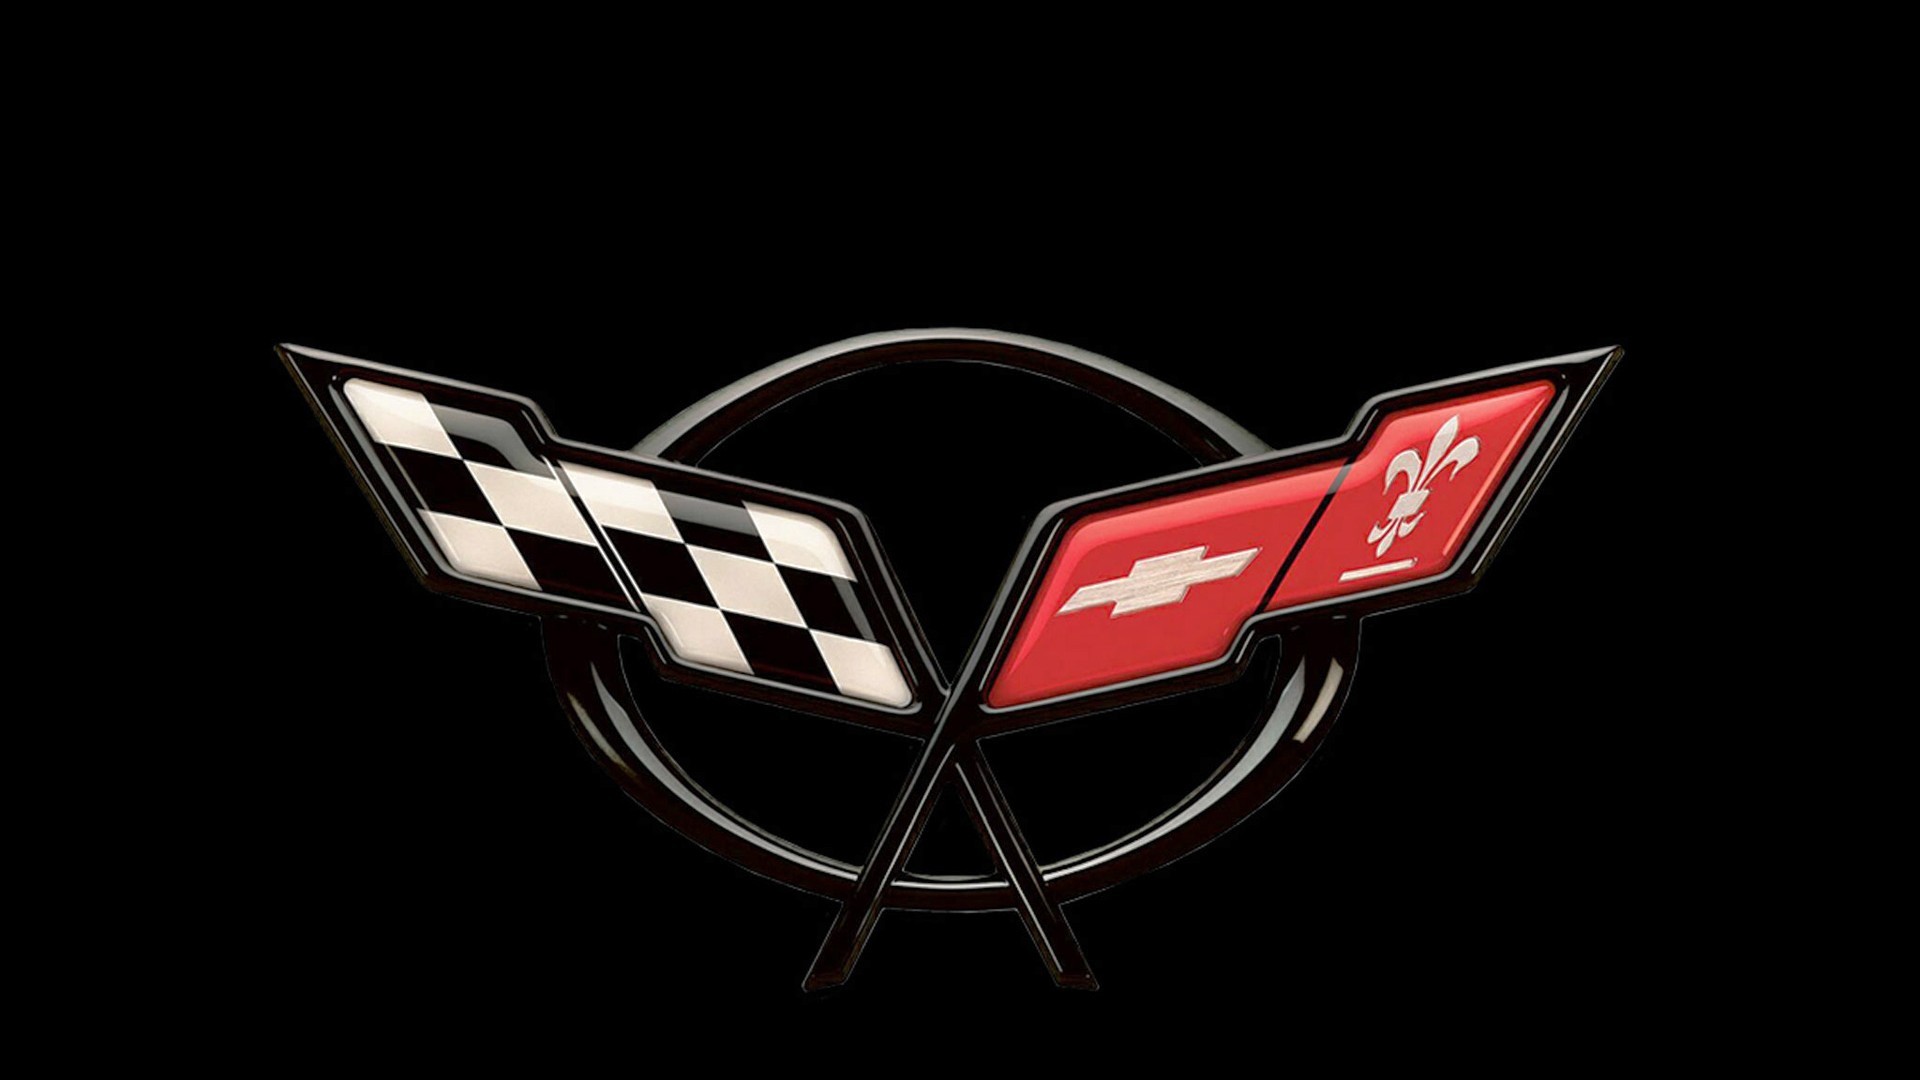 1920x1080 Download Chevy Bowtie Logo wallpapers to your cell phone - bowtie .